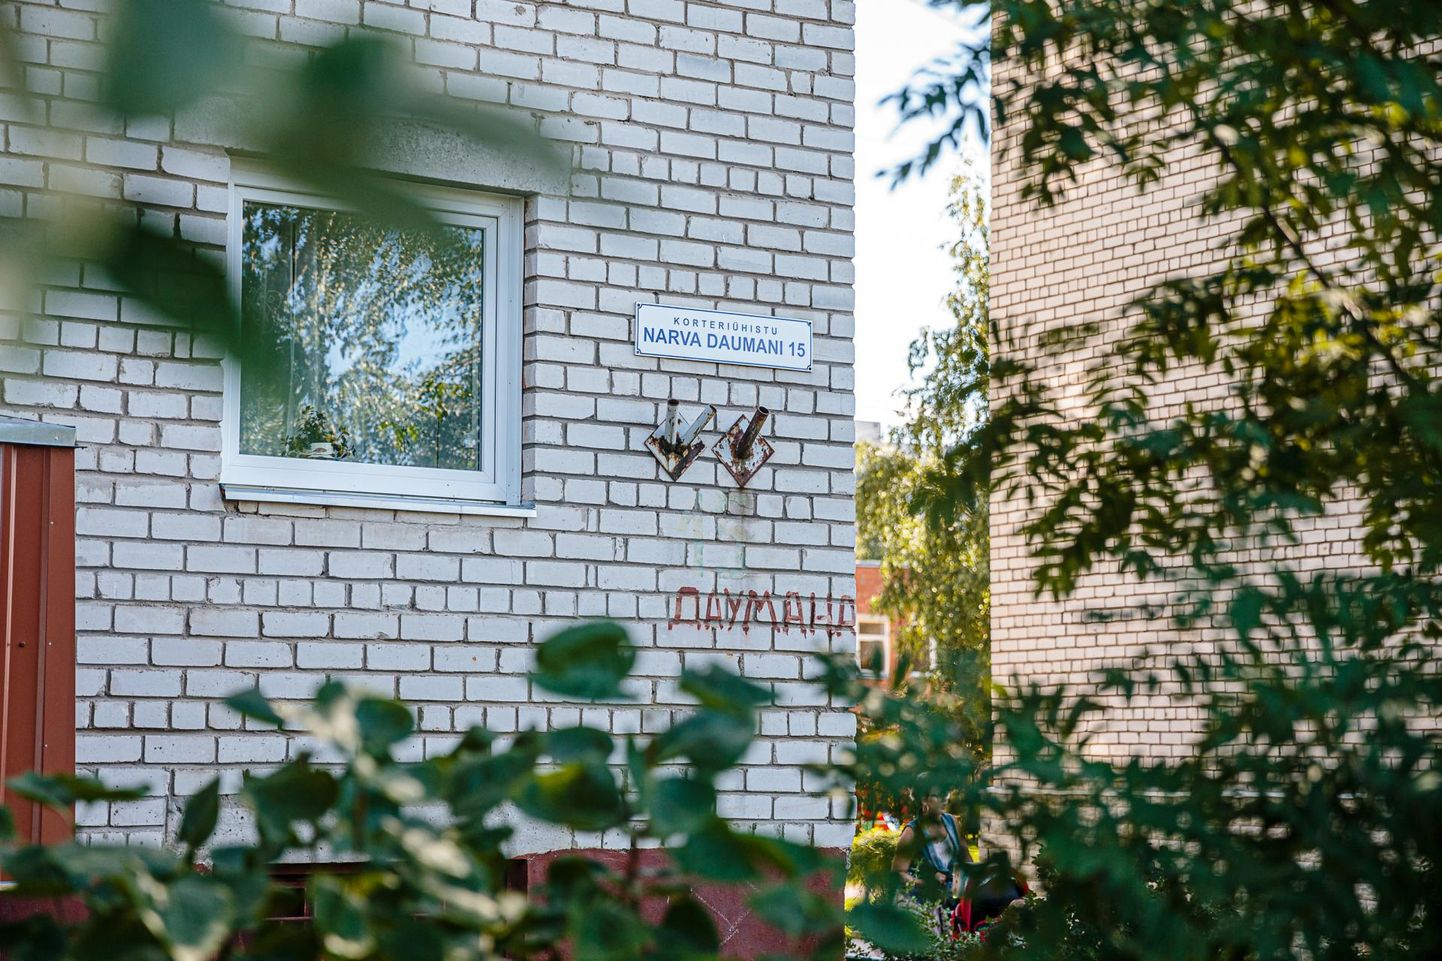 In January, Narva changed the names of streets named after Communist revolutionaries Albert-August Tiimann and Ancis Dauman